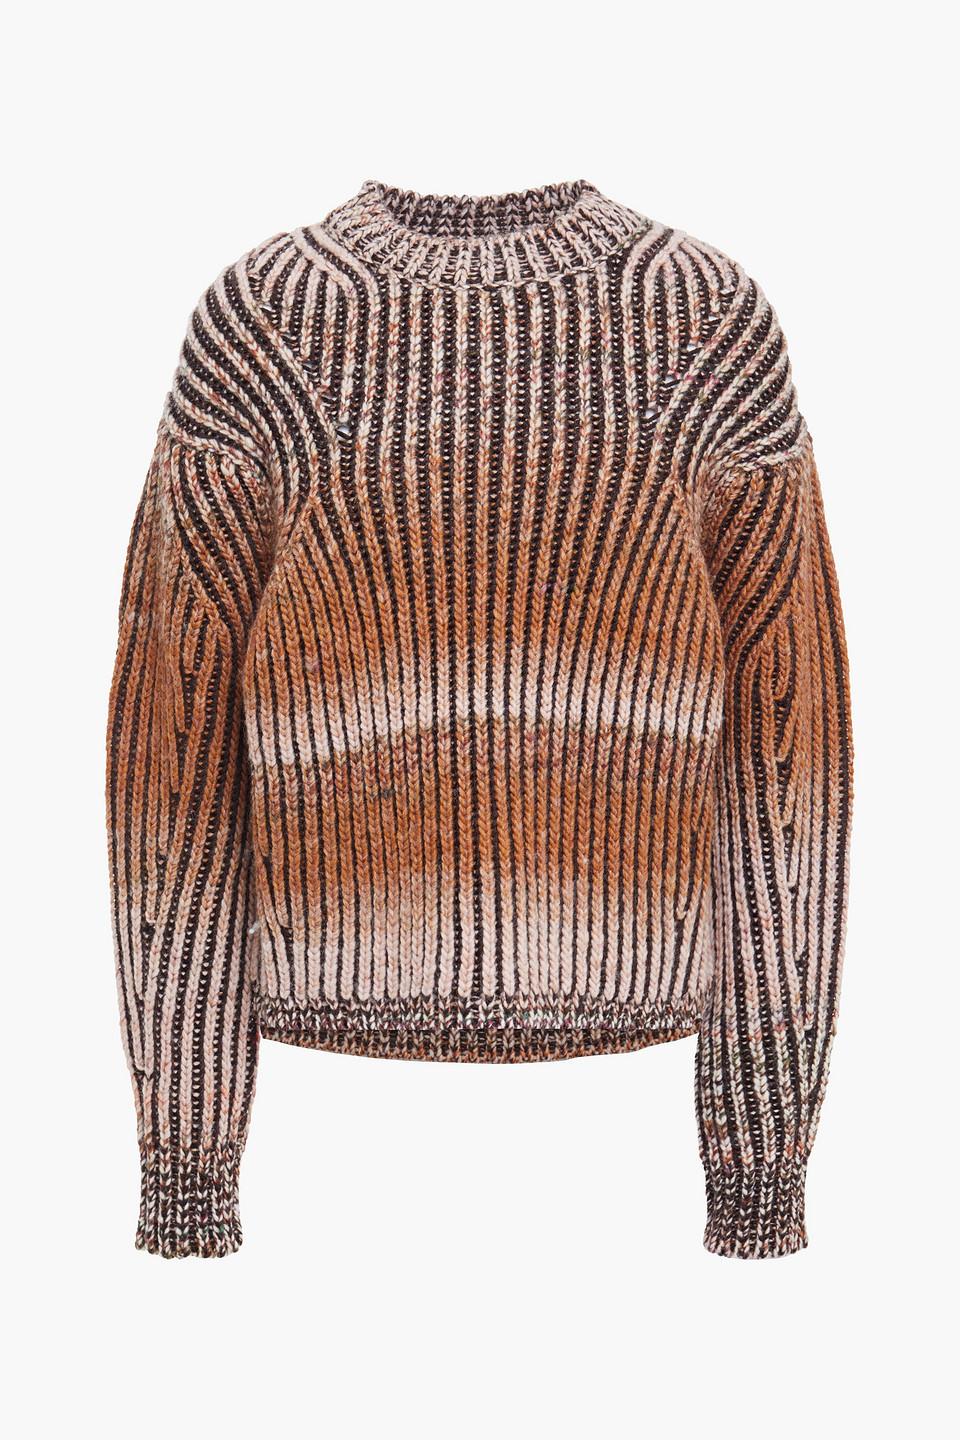 Acne Studios Dégradé Ribbed-knit Sweater in White | Lyst